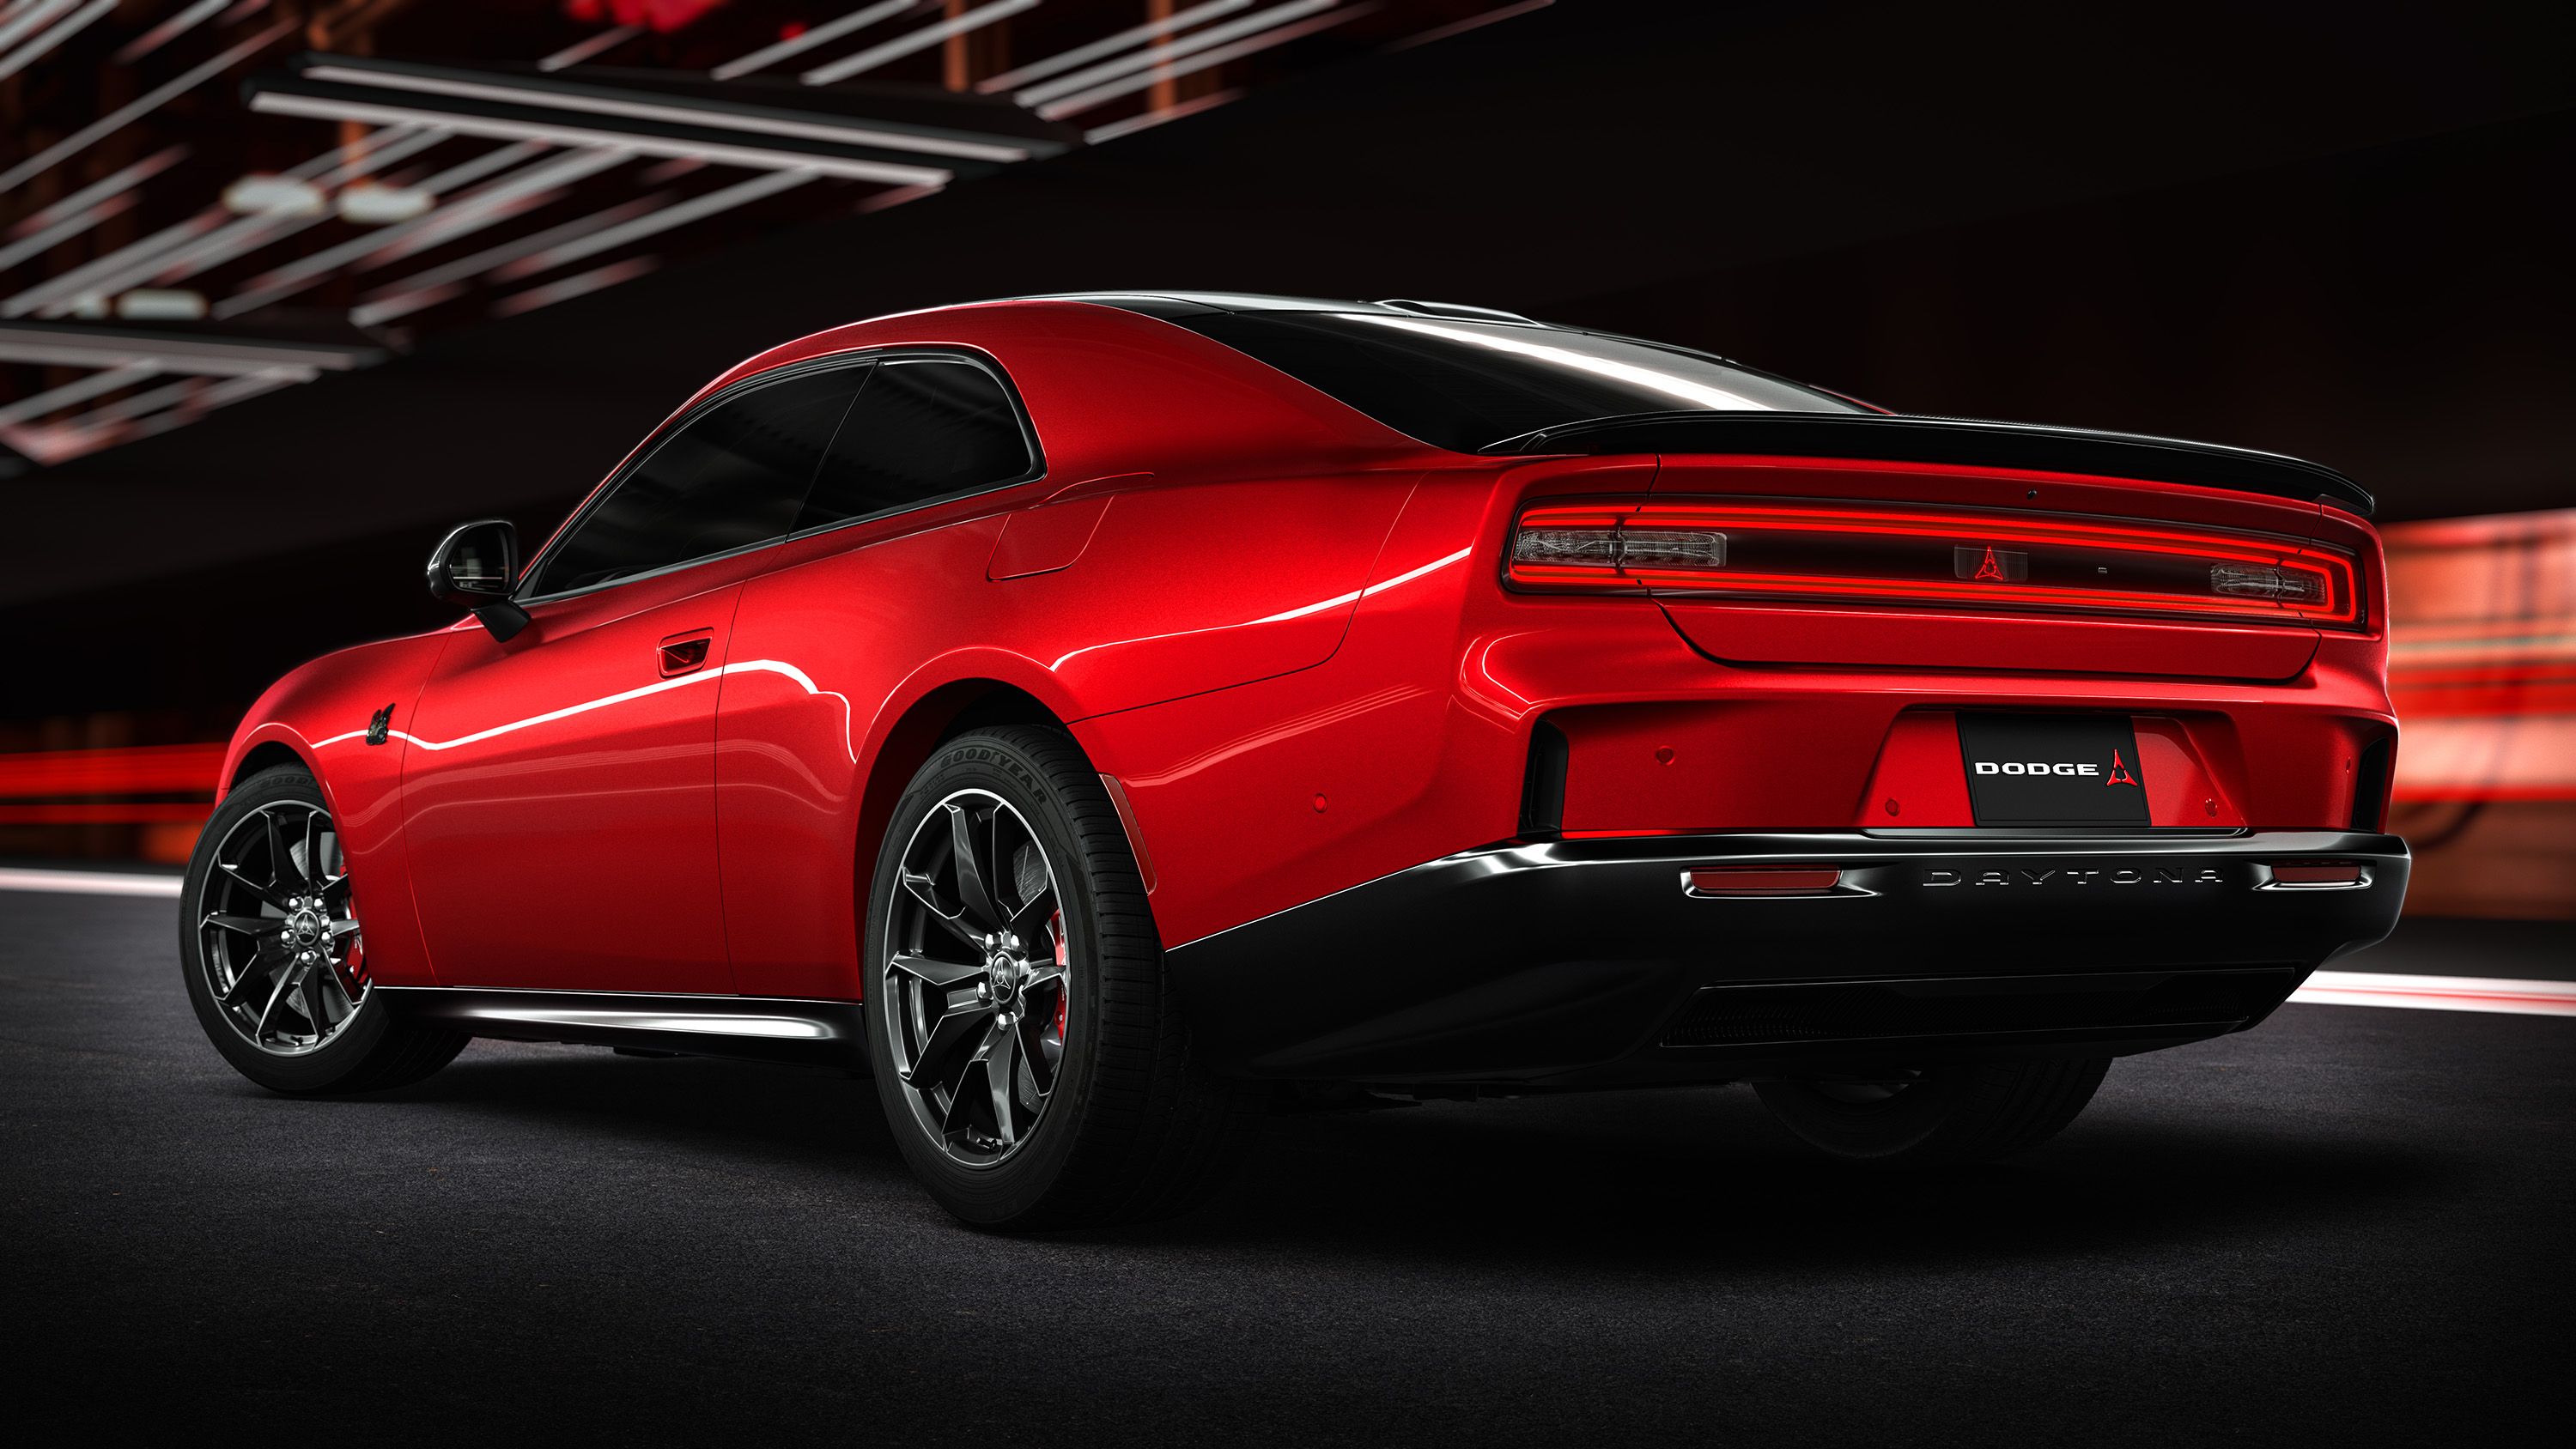 The fully-electric Dodge Charger Daytona